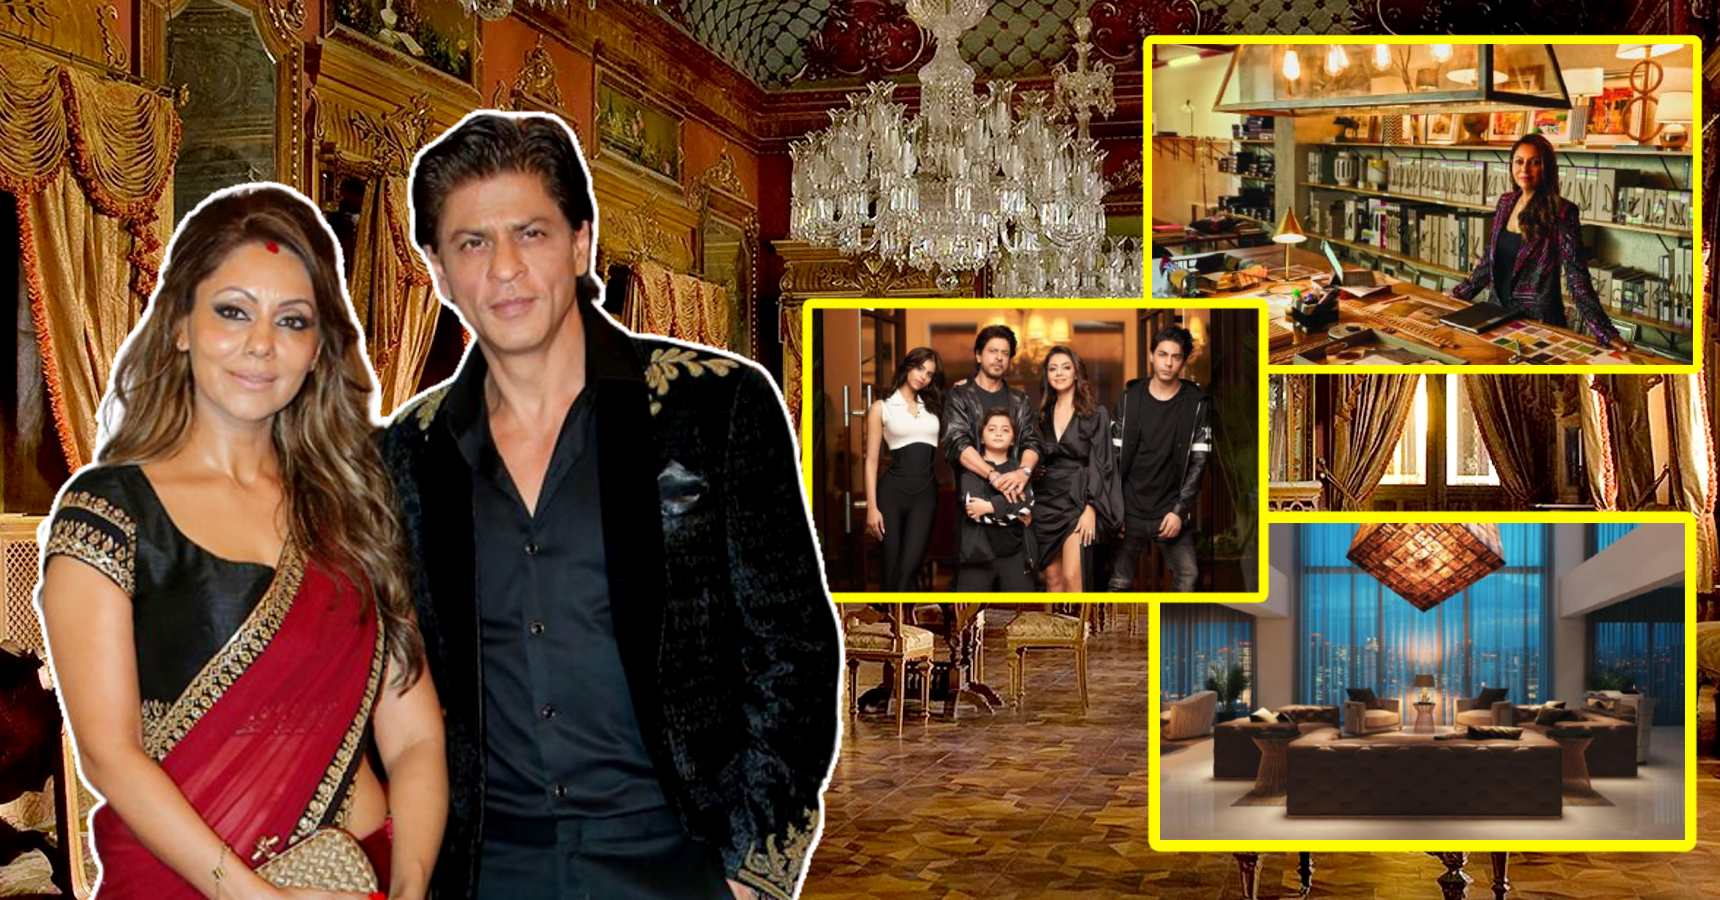 Gouri Khan shares interior pictures of Shahrukh Khan's house viral on social media